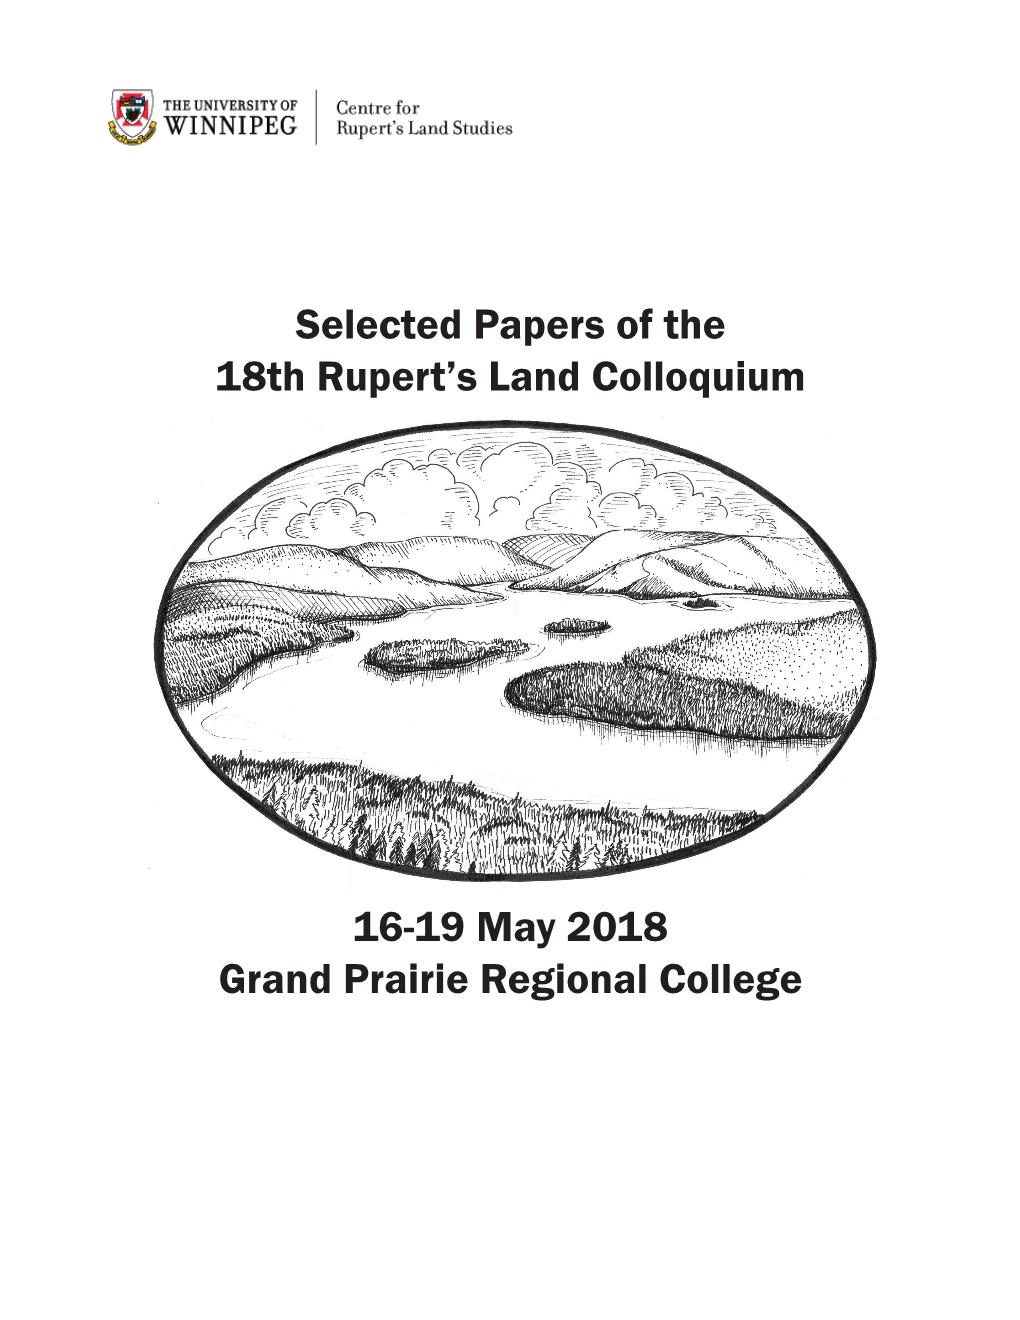 Selected Papers of the 18Th Rupert's Land Colloquium 16-19 May 2018